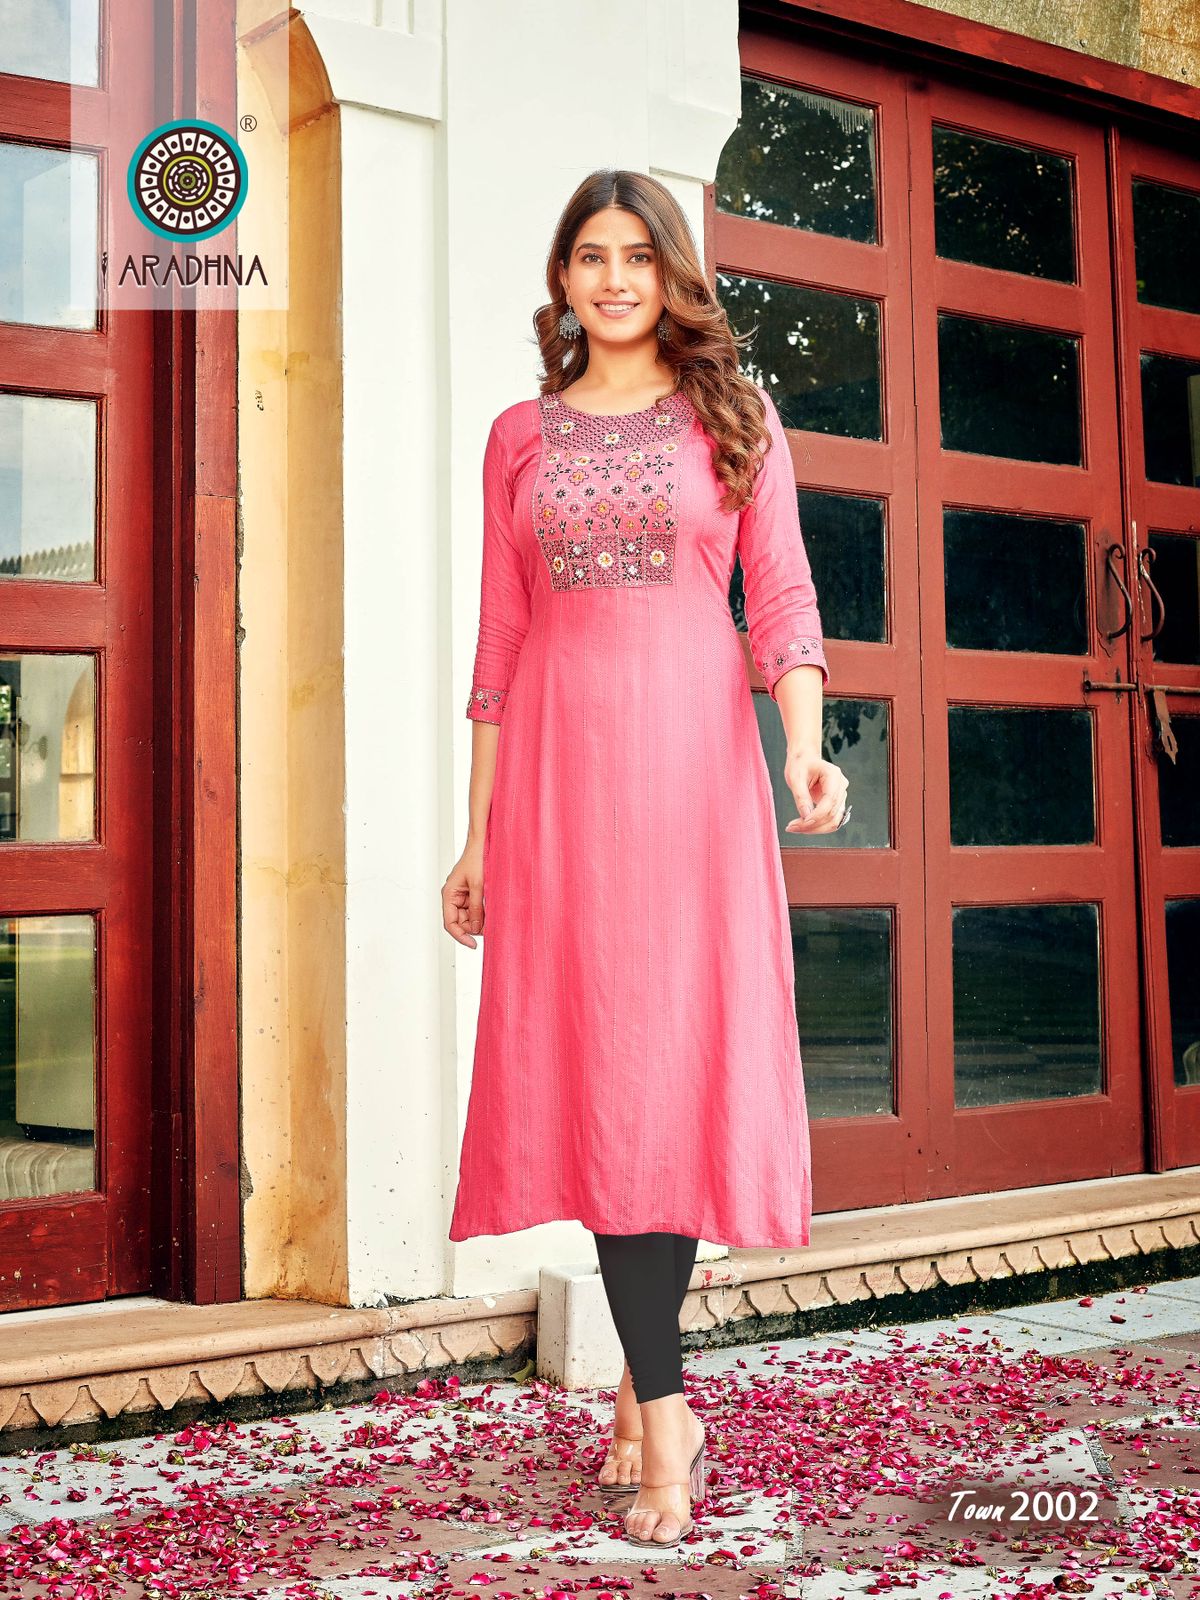 Aradhna Talk of the Town Vol 2 collection 4